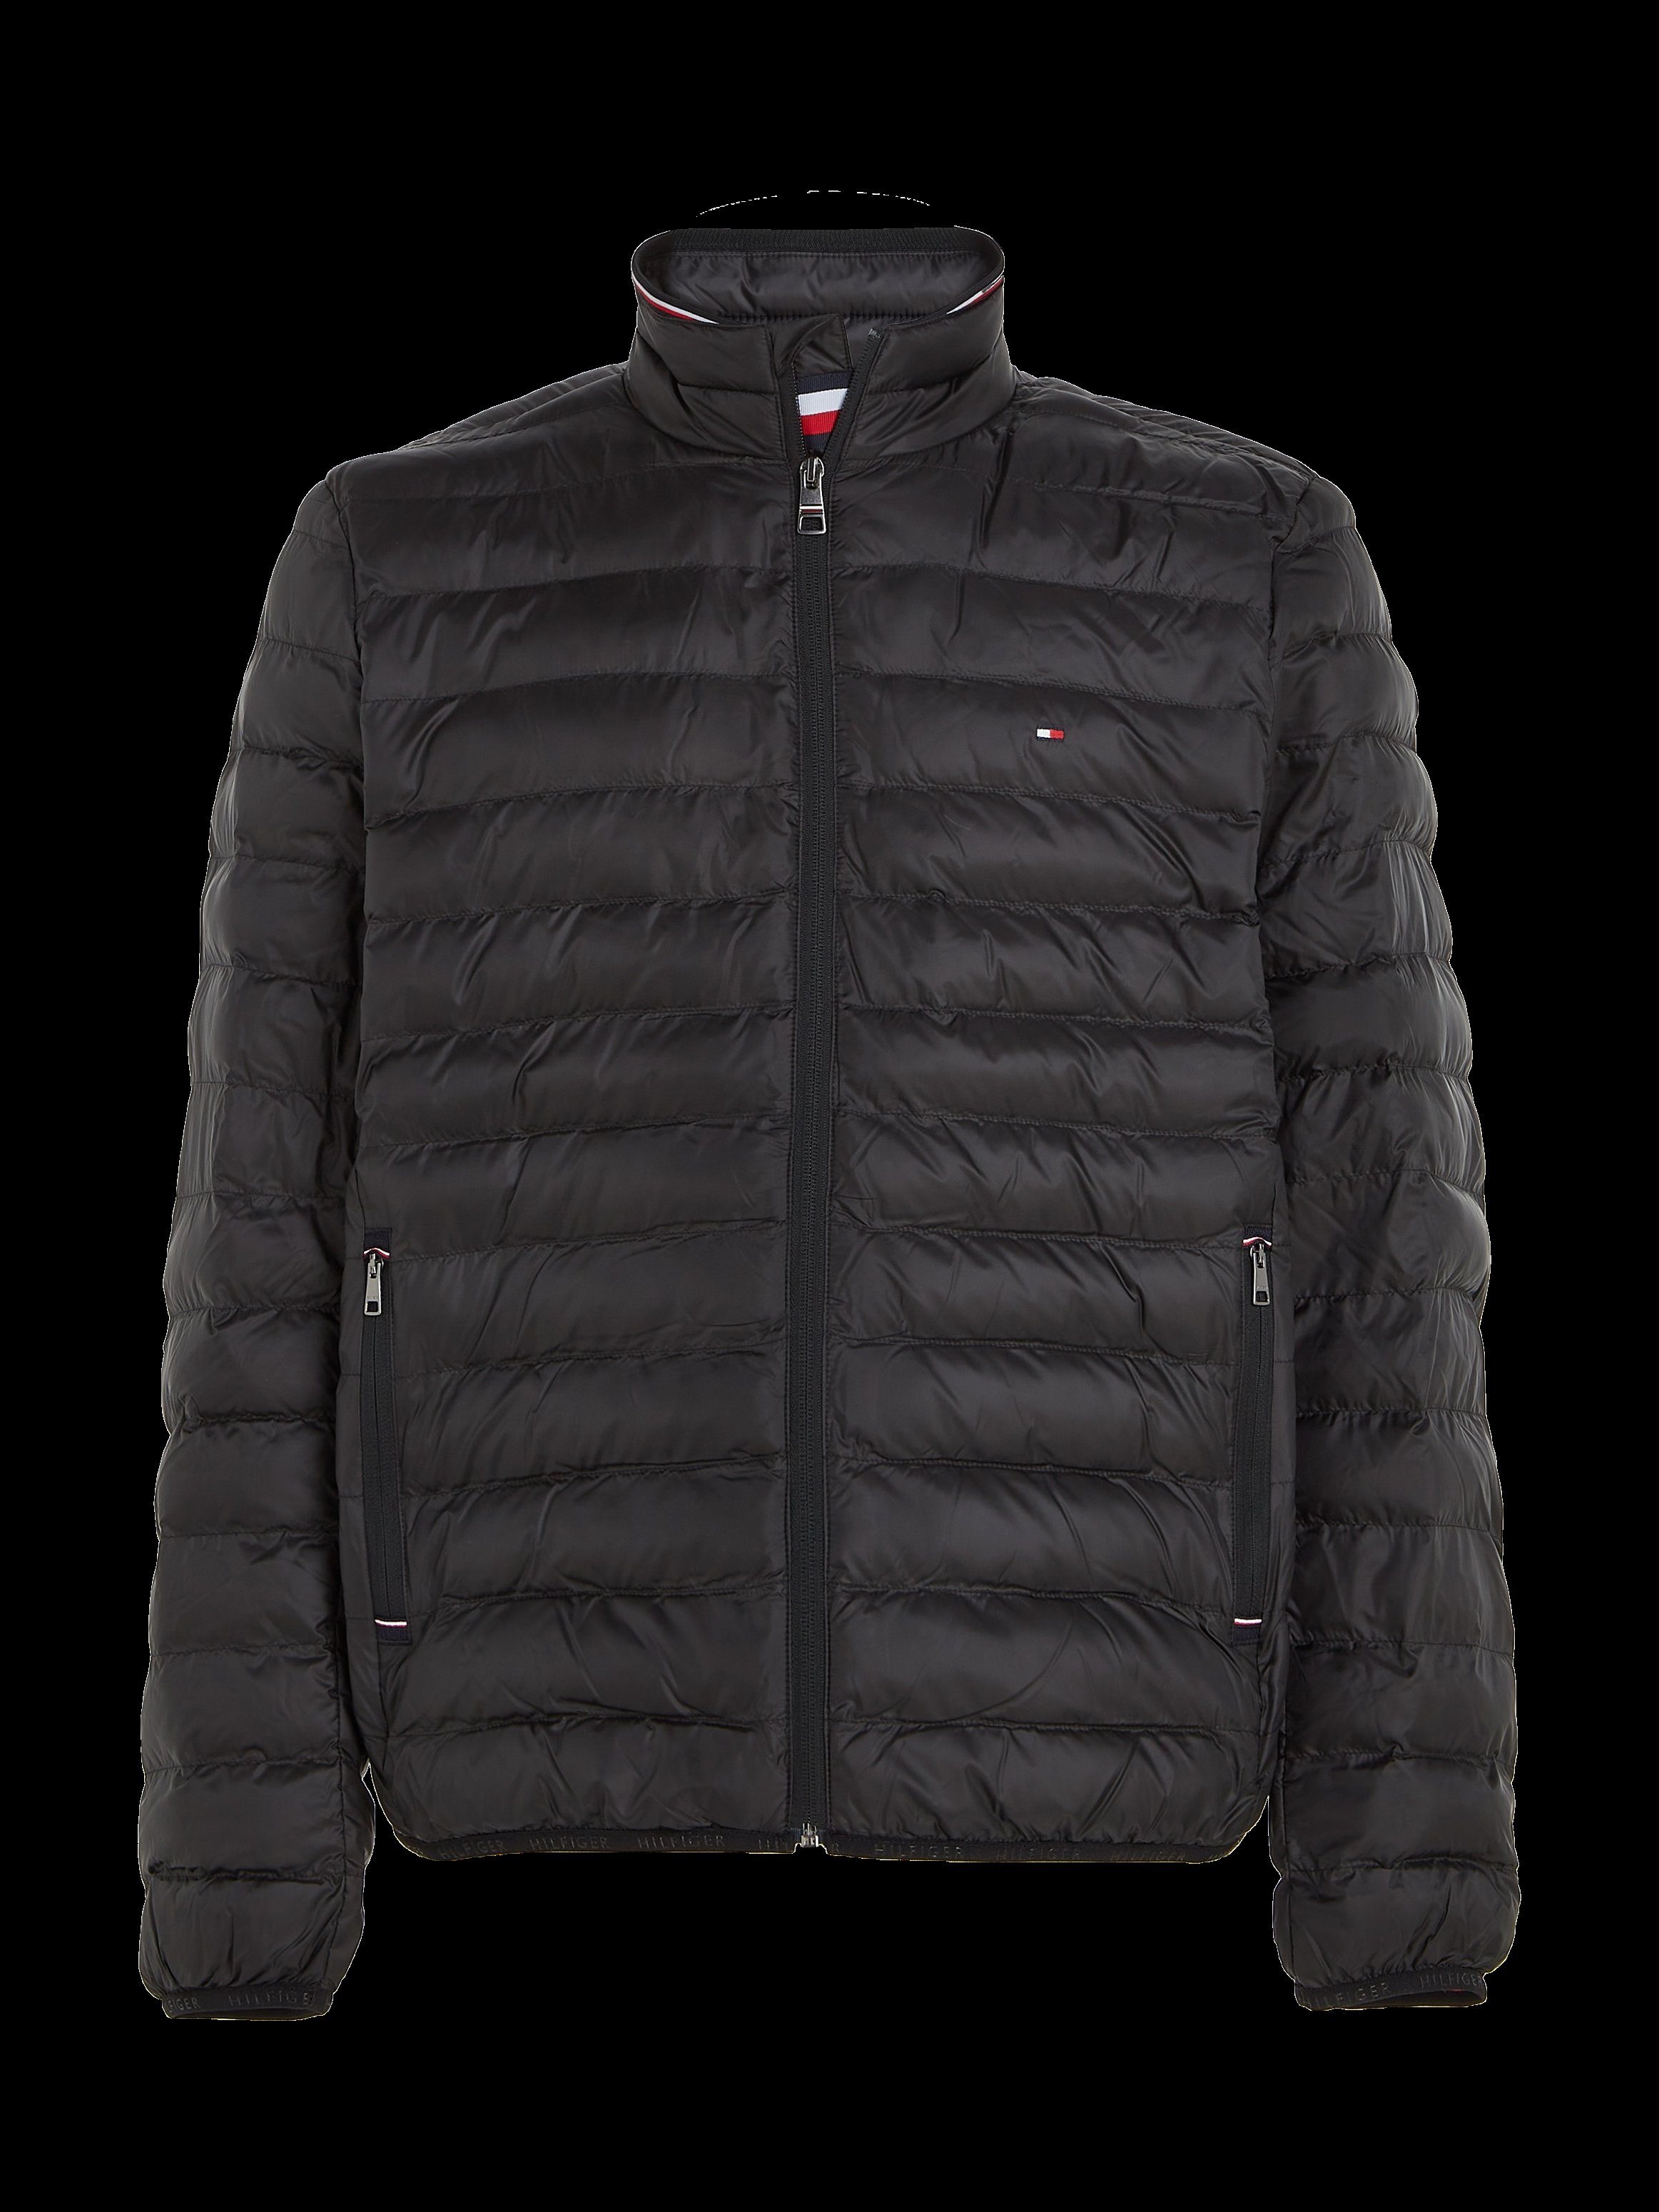 Tommy Hilfiger Steppjacke CORE PACKABLE black JACKET RECYCLED